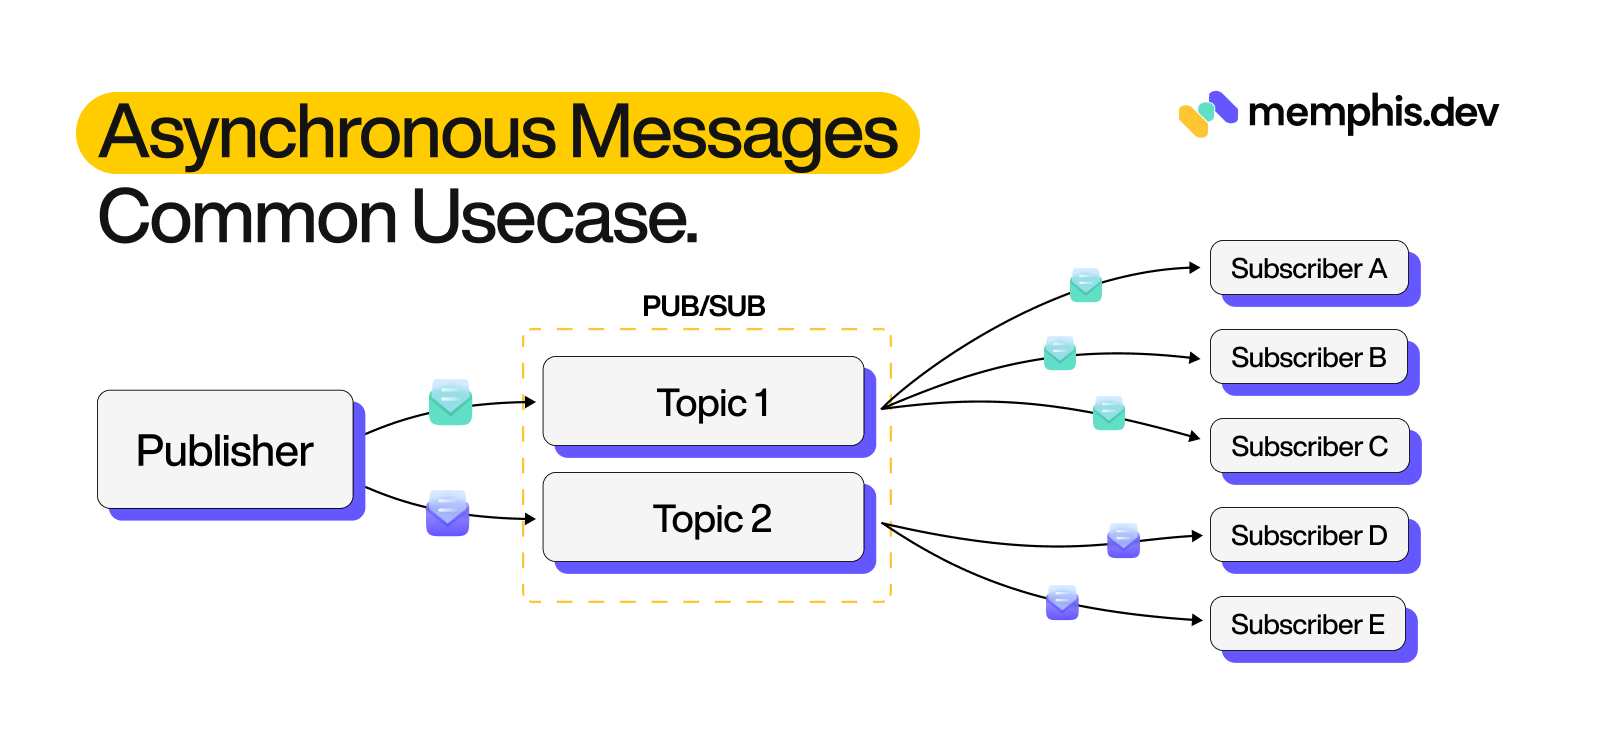 Asynchronous Messages Common Usecase